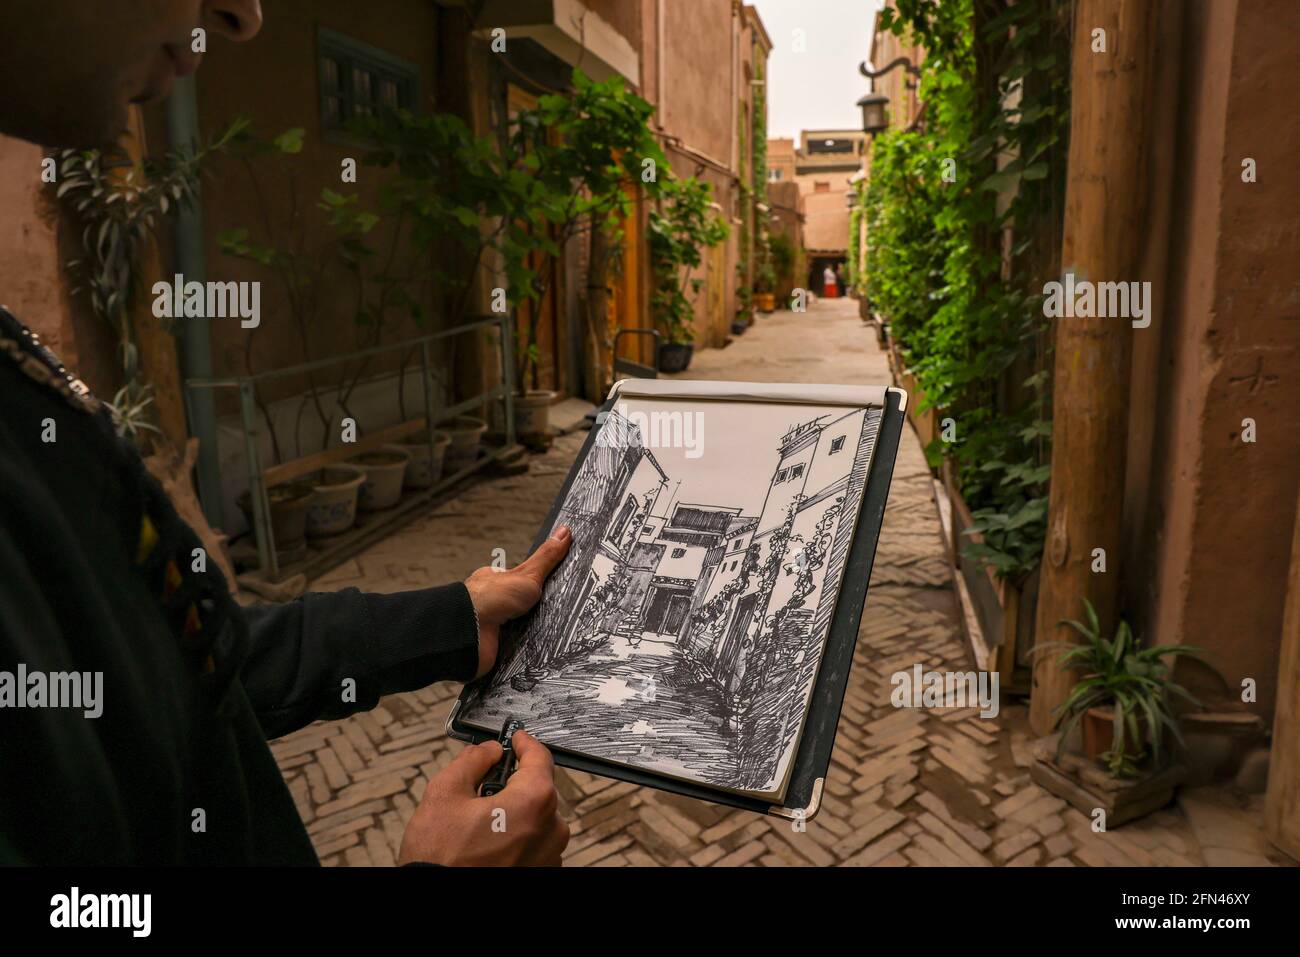 (210514) -- KASHGAR, May 14, 2021 (Xinhua) -- Mamattursunjian Mamatimen paints in an alley in the ancient city of Kashgar in northwest China's Xinjiang Uygur Autonomous Region, May 6, 2021. The dominant color of dwellings in the ancient city of Kashgar in Xinjiang is deep yellow. But in the works of 26-year-old local painter Mamattursunjian Mamatimen, more colors like orange, white, purple, blue. are used to paint the city. That's his feeling of life, and also a feeling shared by the youths in Kashgar, Mamattursunjian said. 'It takes courage to break through the tradition.' Mamattursunjian Stock Photo